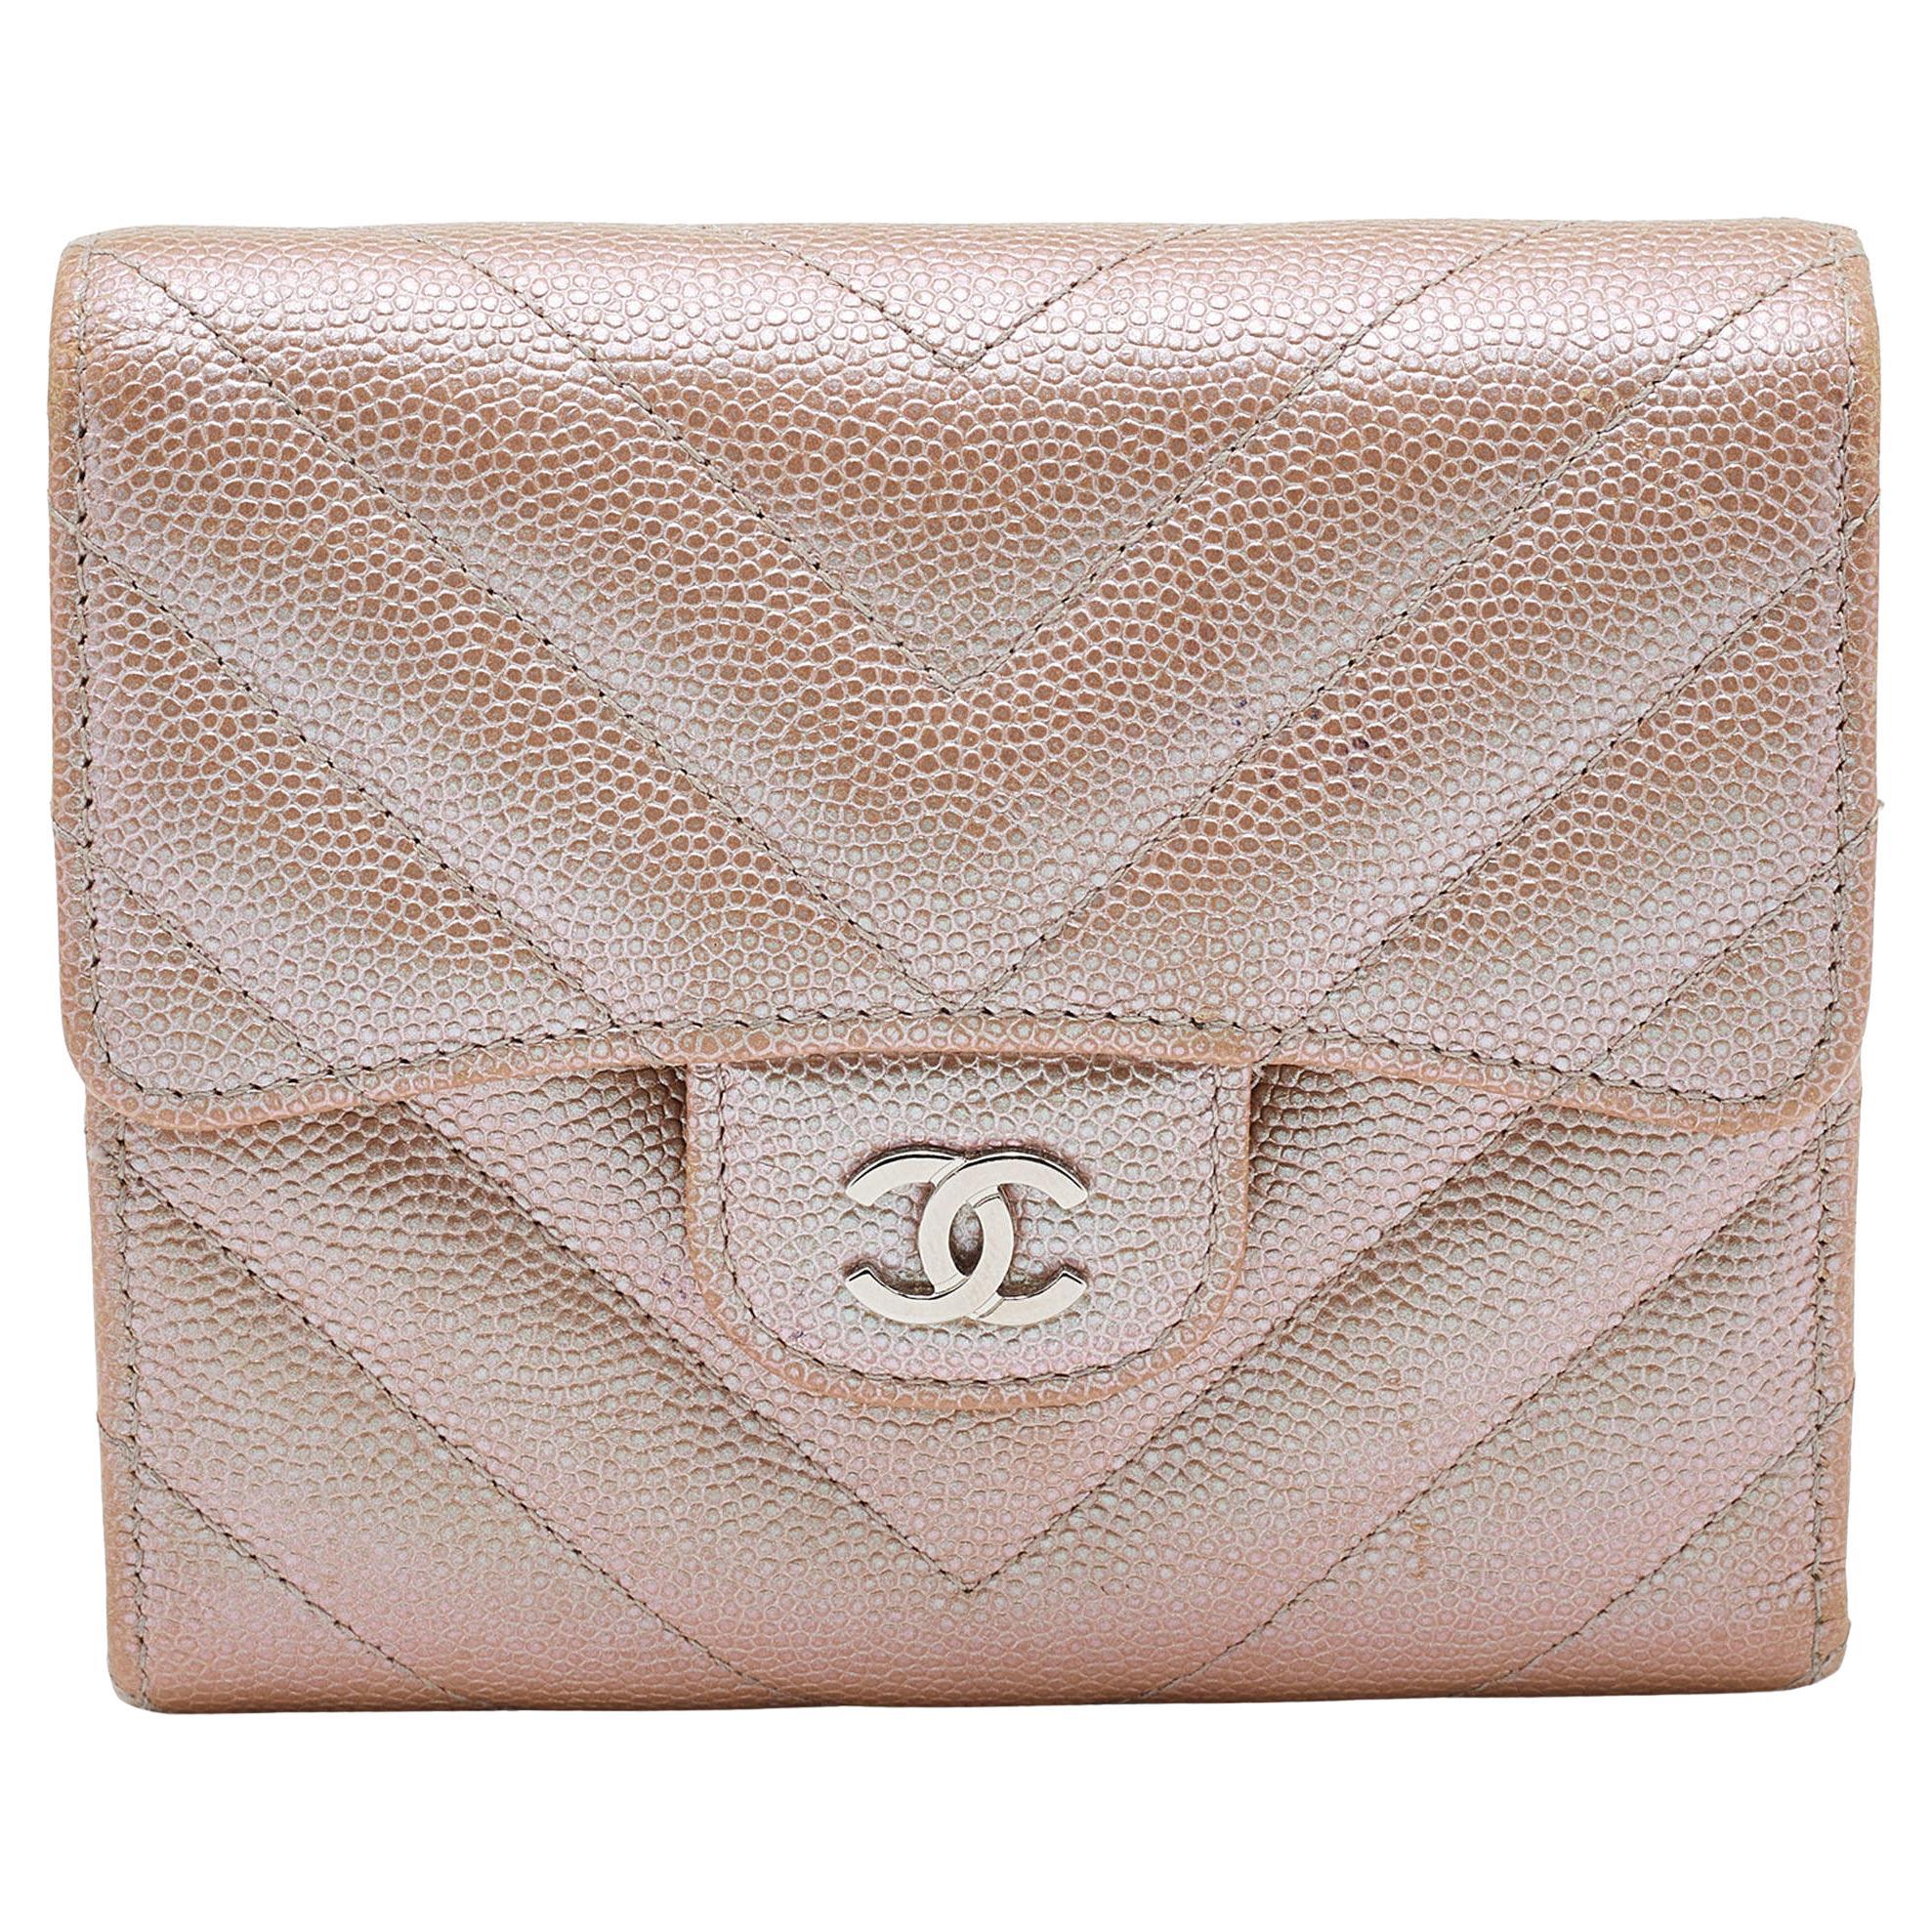 Chanel Metallic Iridescent Caviar Chevron Quilted Leather CC Compact Wallet